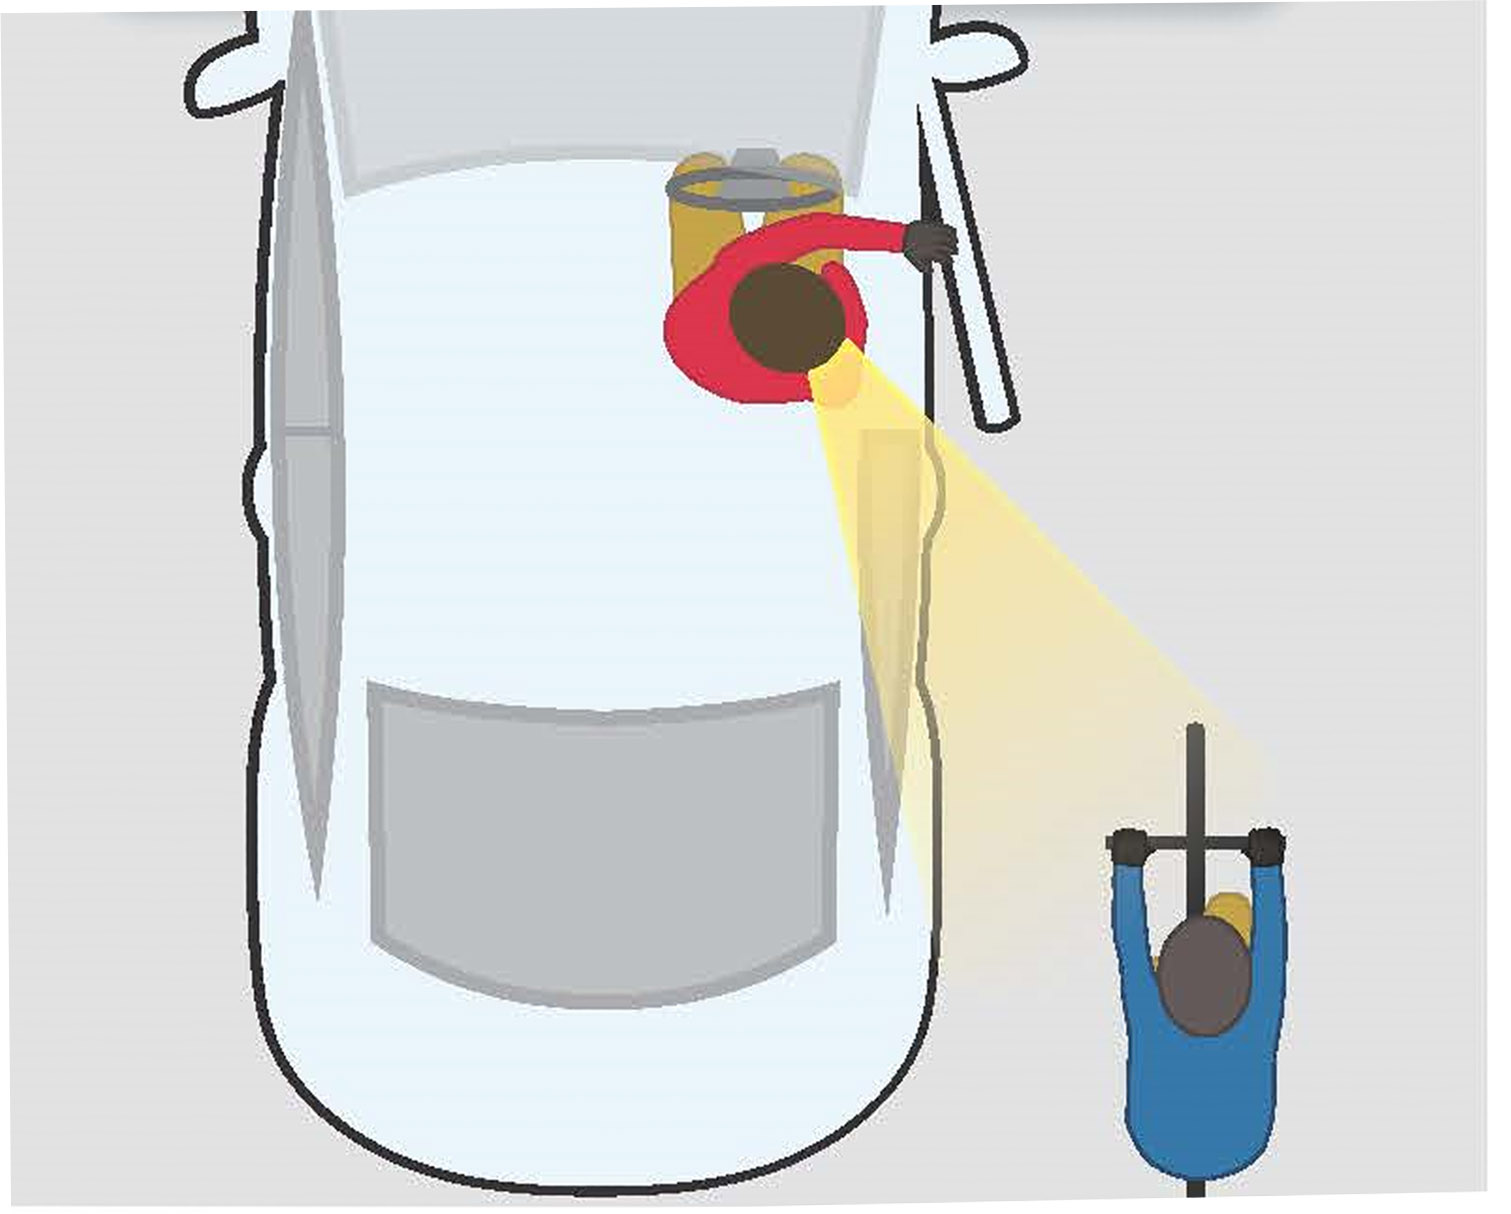 Diagram shows birds eye cut-away view of a driver, such as in the UK, or a front passenger, using the far hand method to reach across one's chest to the car door latch. The motion causes the upper torso to twist, allow head to turn almost directly back over the shoulder and out back to watch for dangerous on-coming traffic before opening car door wide & exiting.